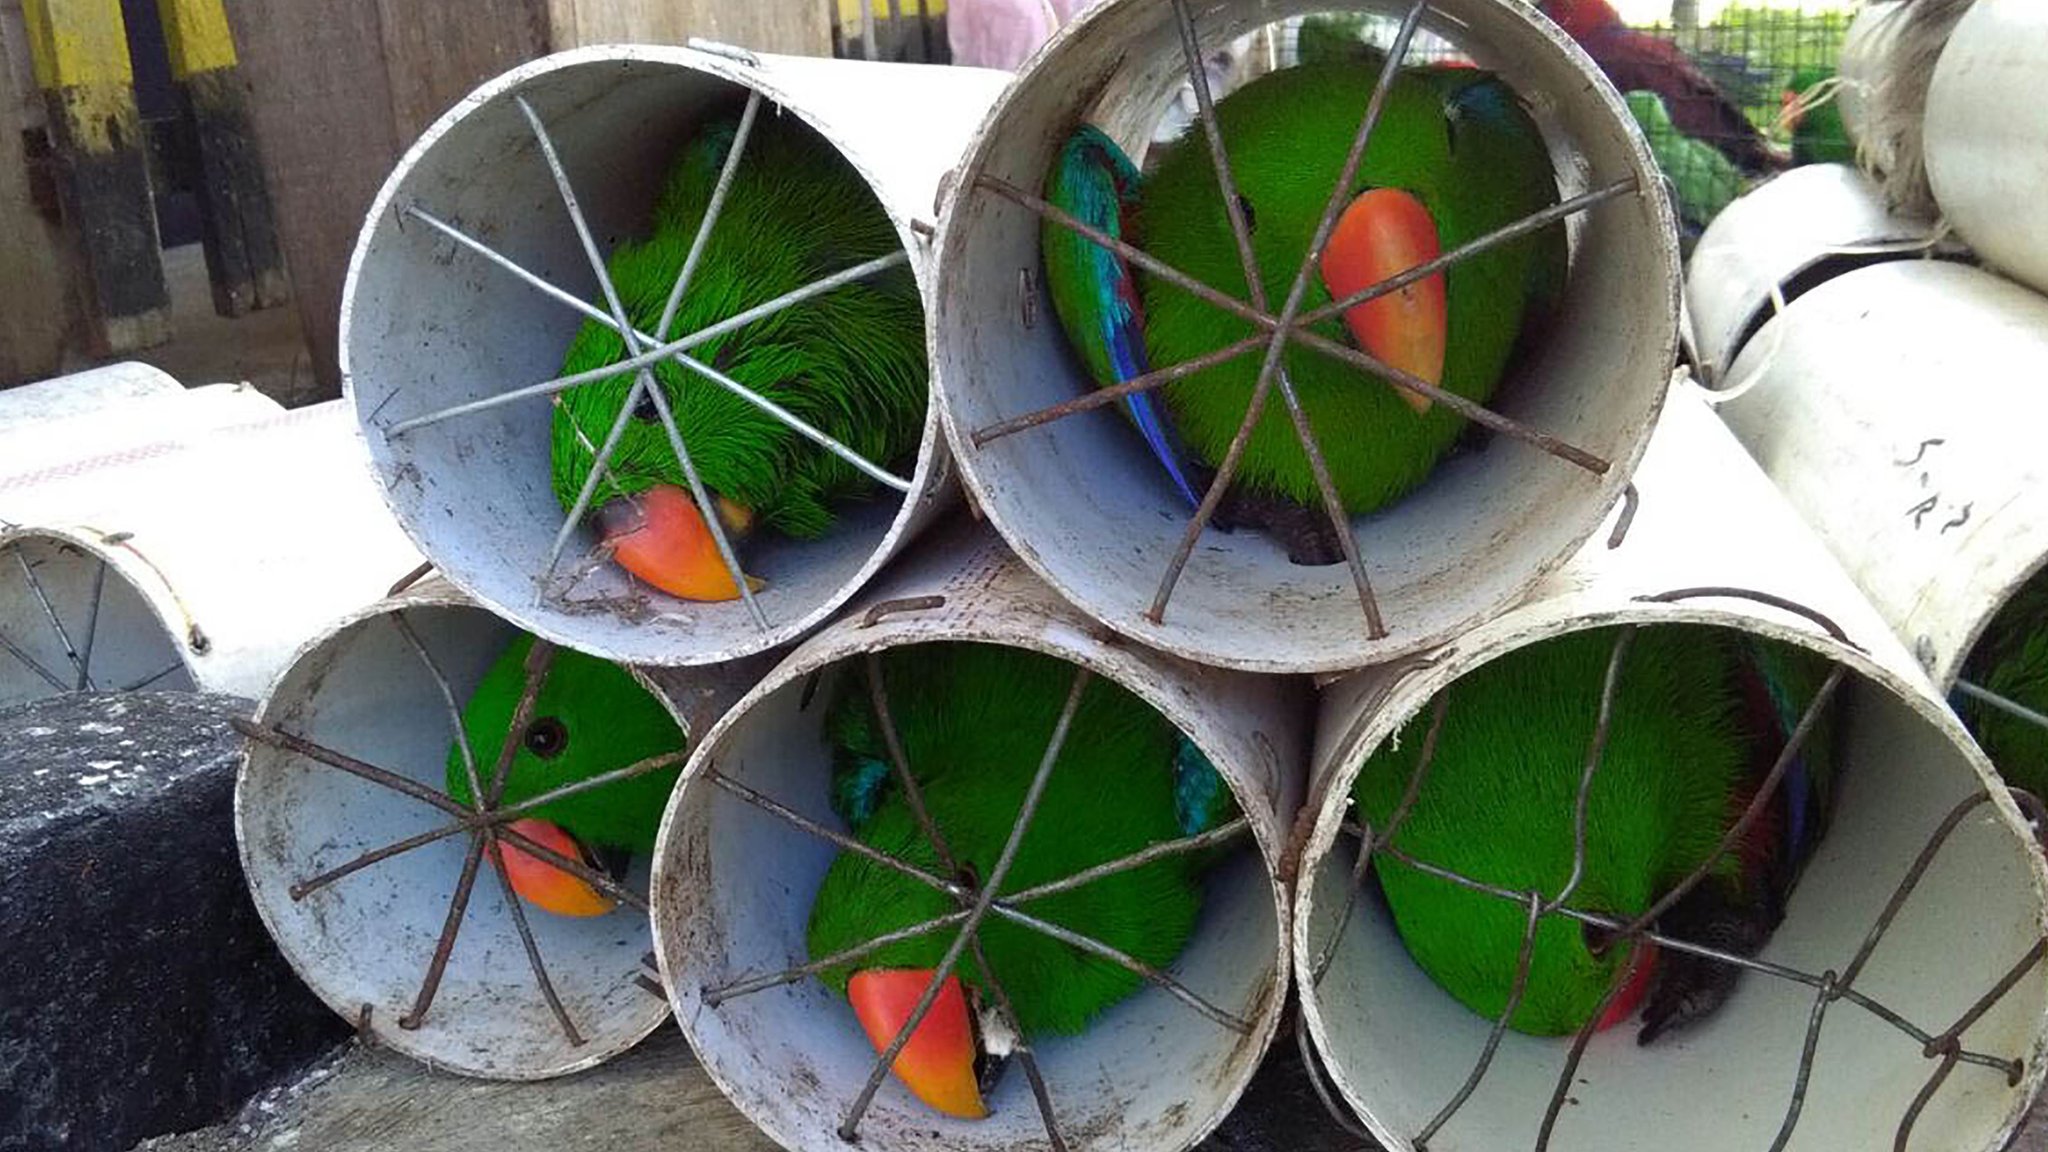 Exotic Indonesian birds smuggled in drain pipes